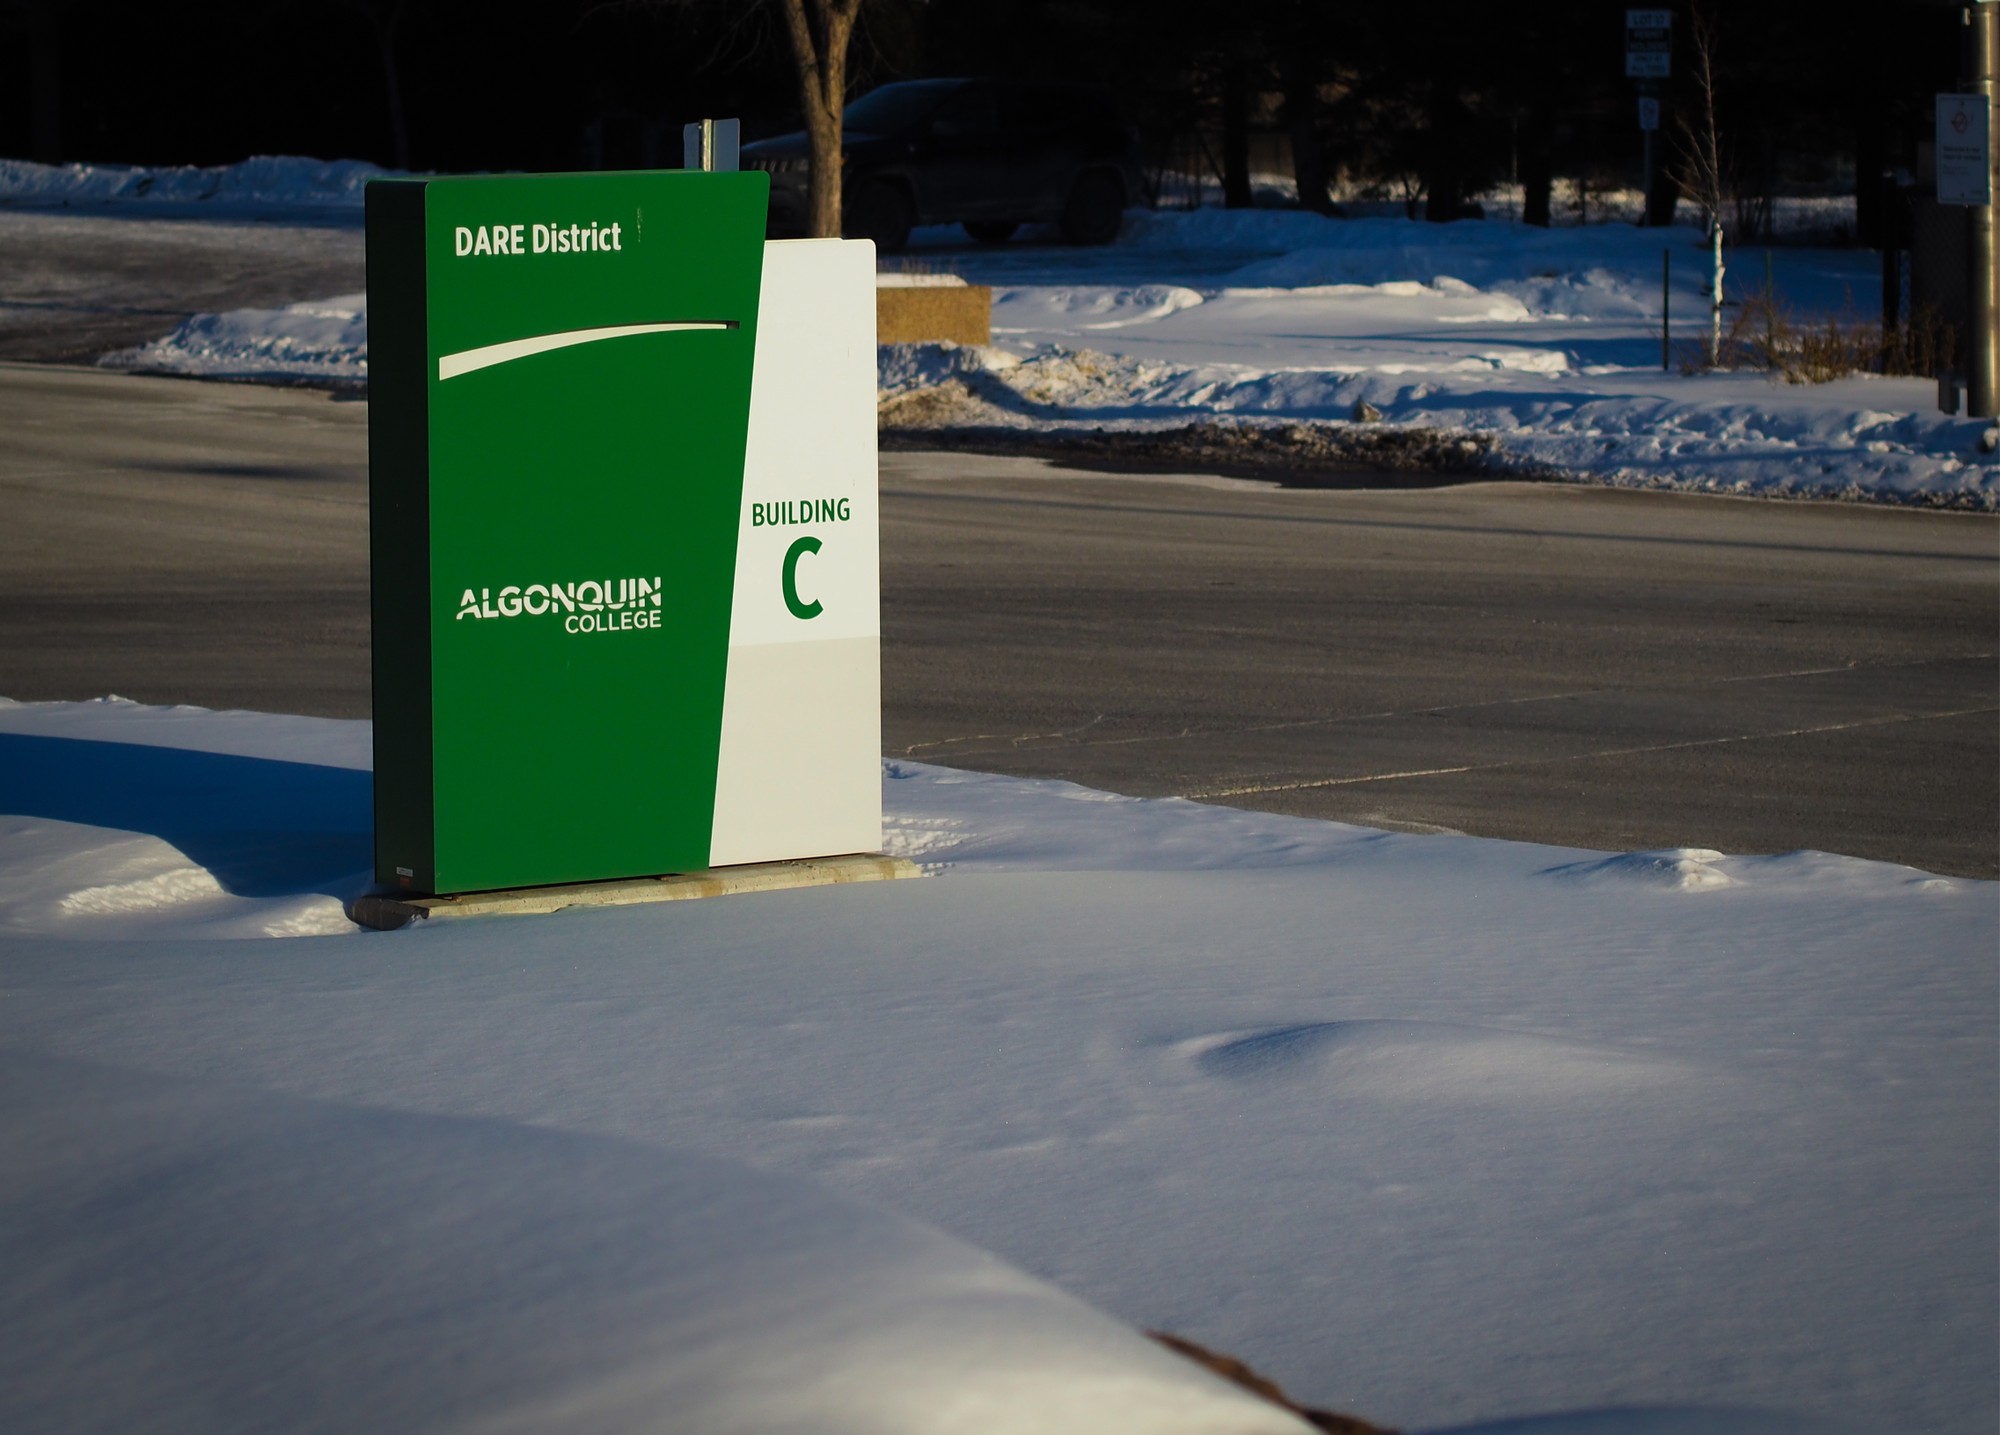 Algonquin College currently employs 1,387 full time and 2,714 part time people.